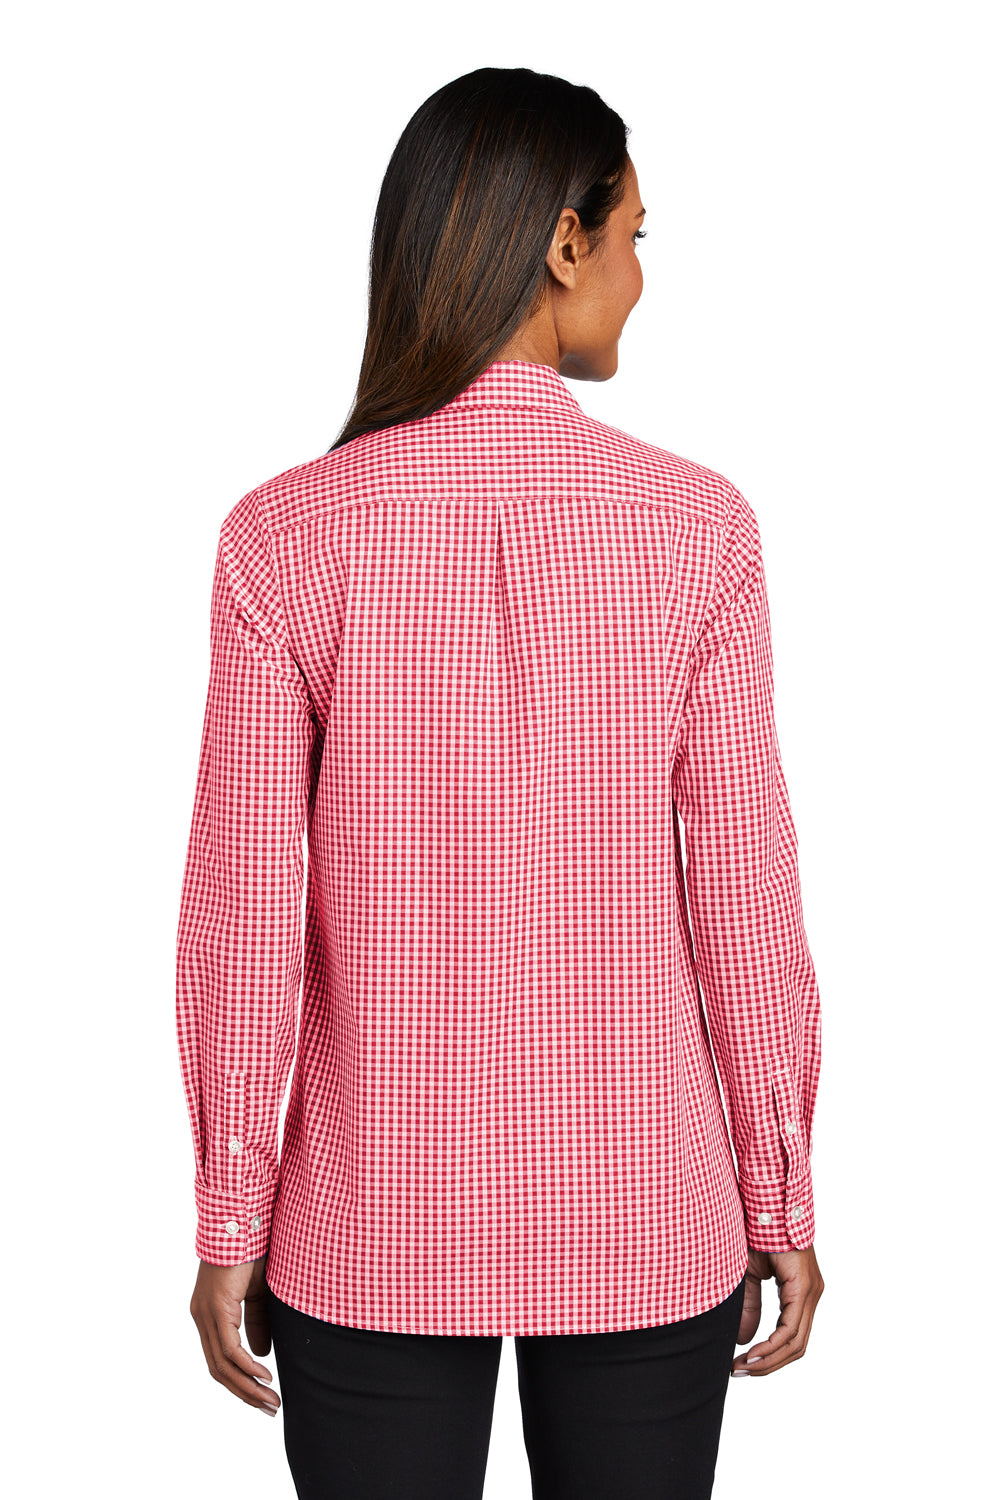 Port Authority Womens Broadcloth Gingham Long Sleeve Button Down Shirt Rich Red/White Side